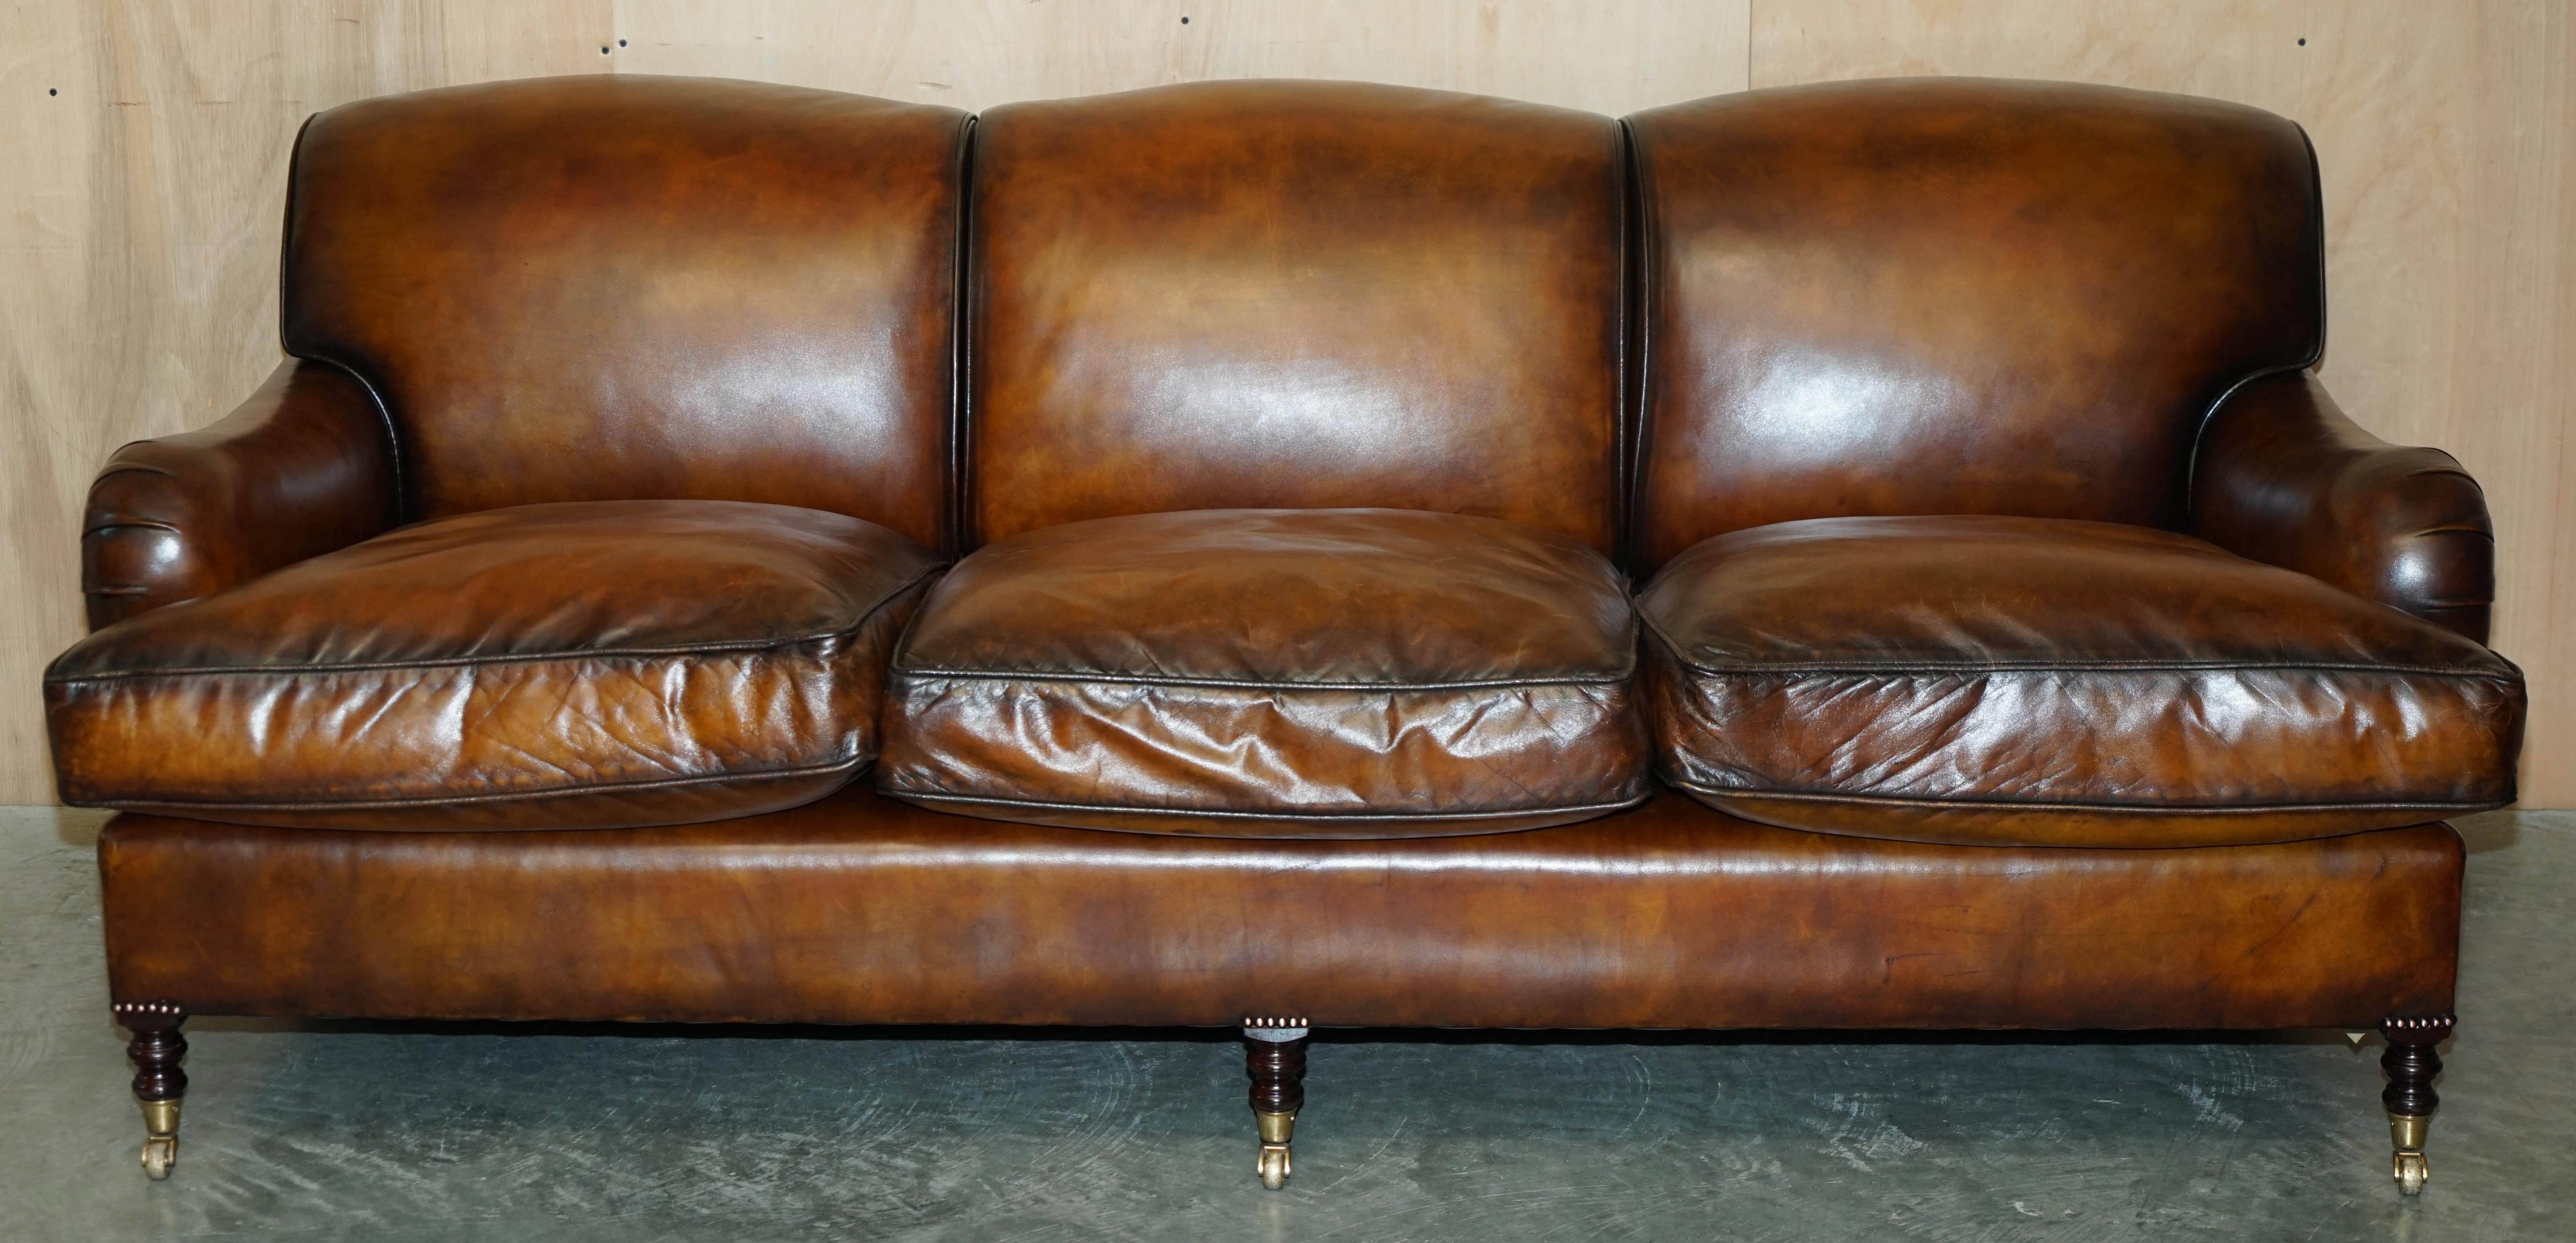 1 von 2 LARGE GEORGE SMITH HOWARD & SON's BROWN LEATHER SIGNATURE SCROLL ARM SOFA (Art déco) im Angebot